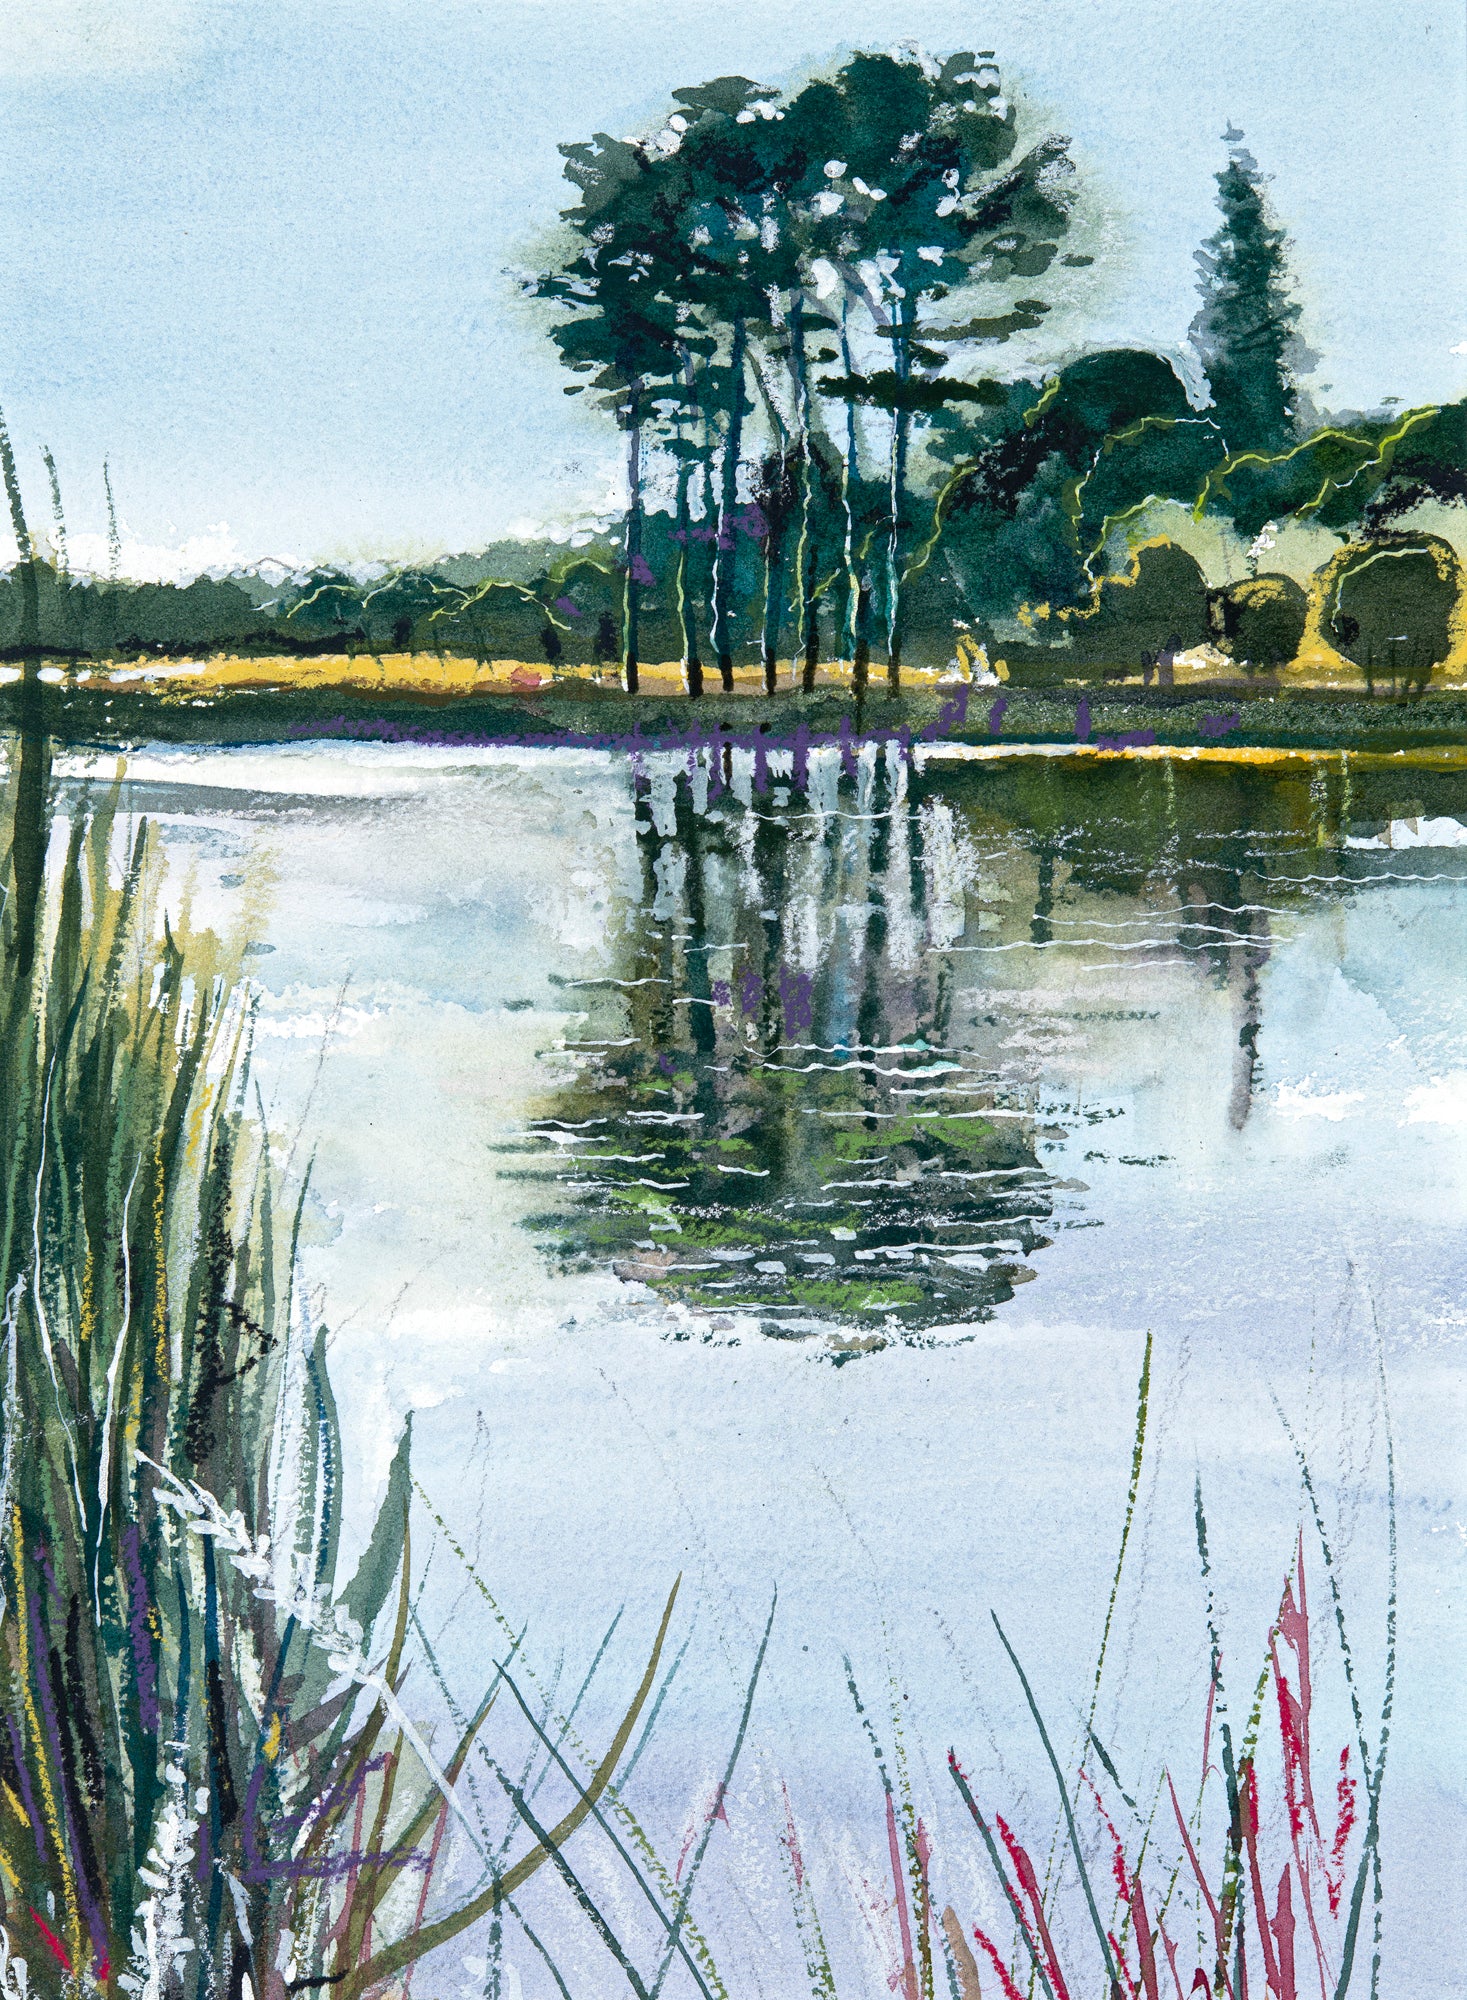 The Lake & Pines by Richard Carruthers